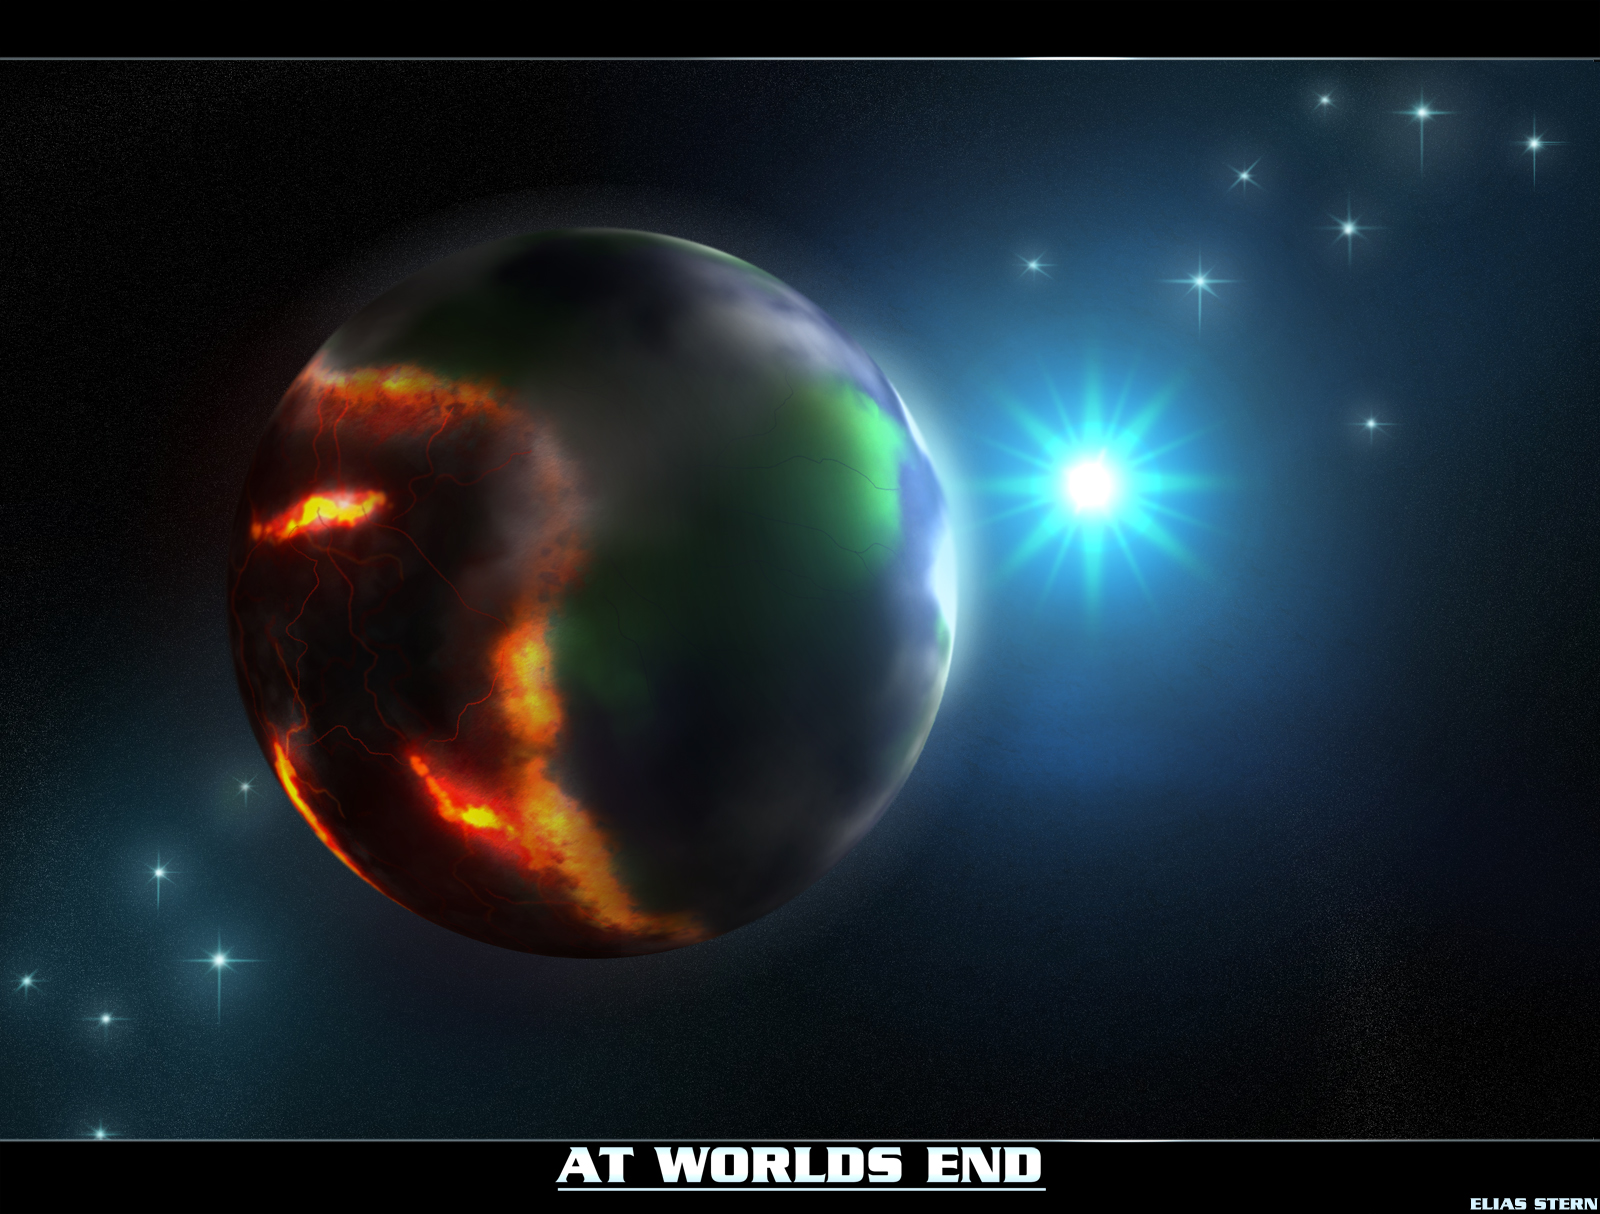 At Worlds End